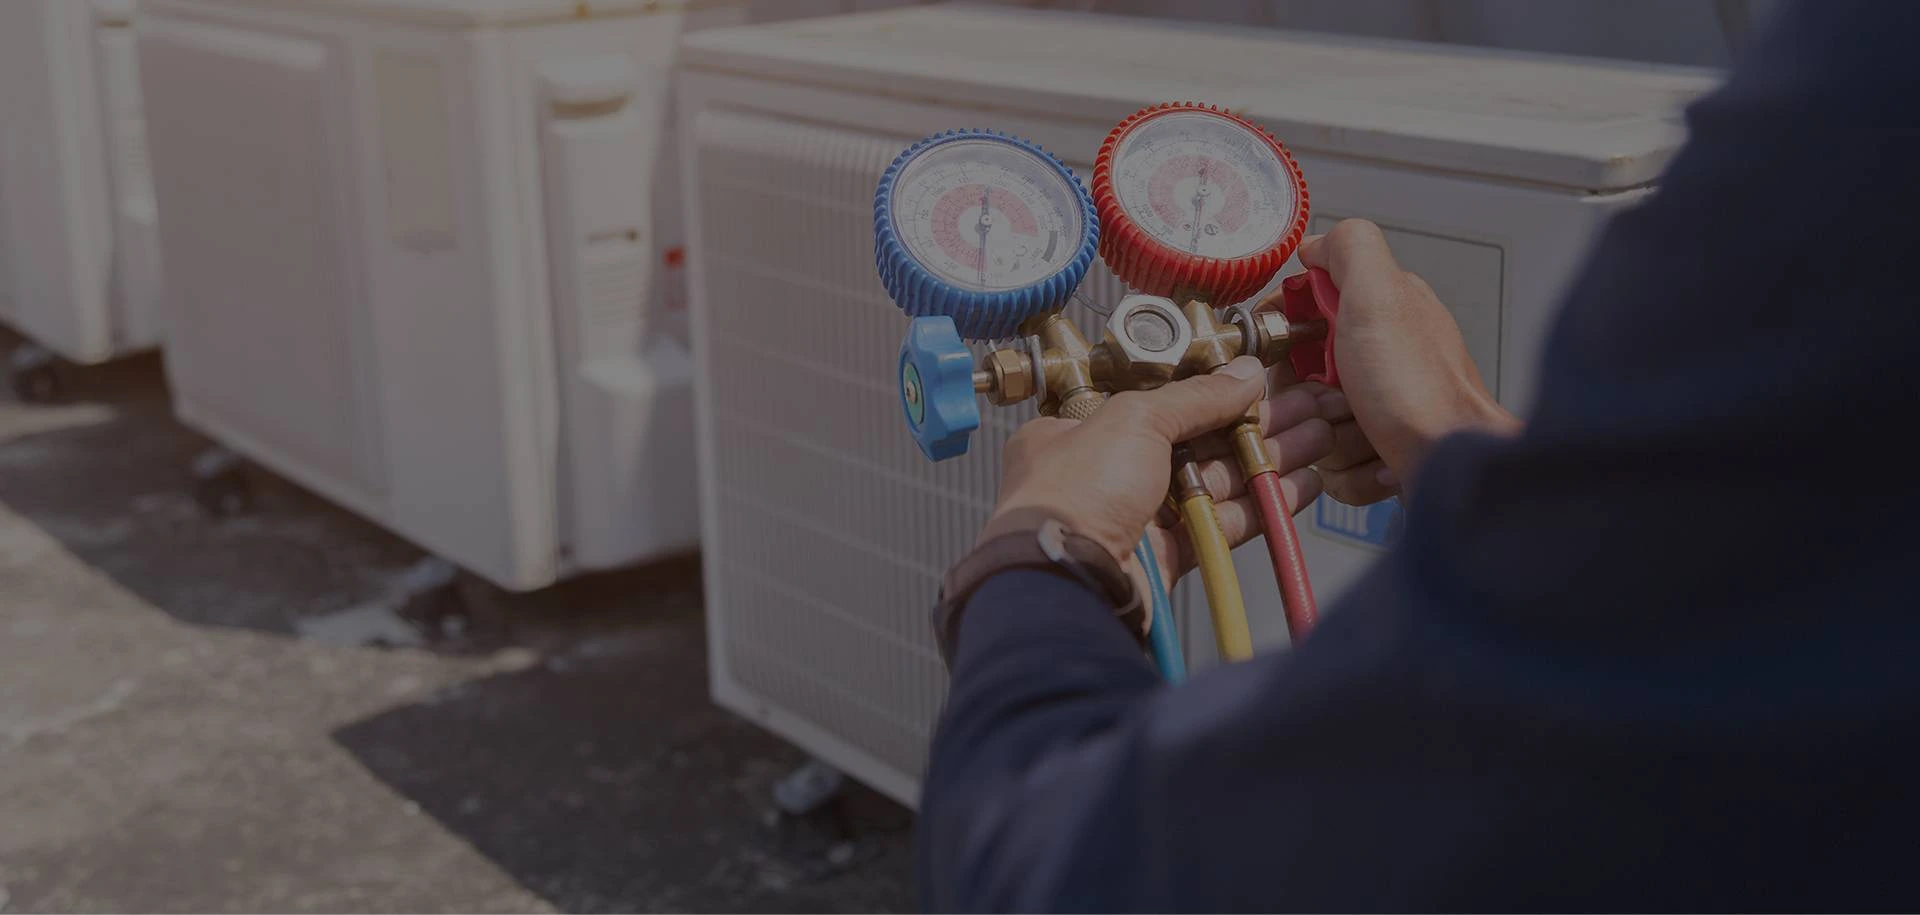 A person holding two gauges in front of an air conditioner.